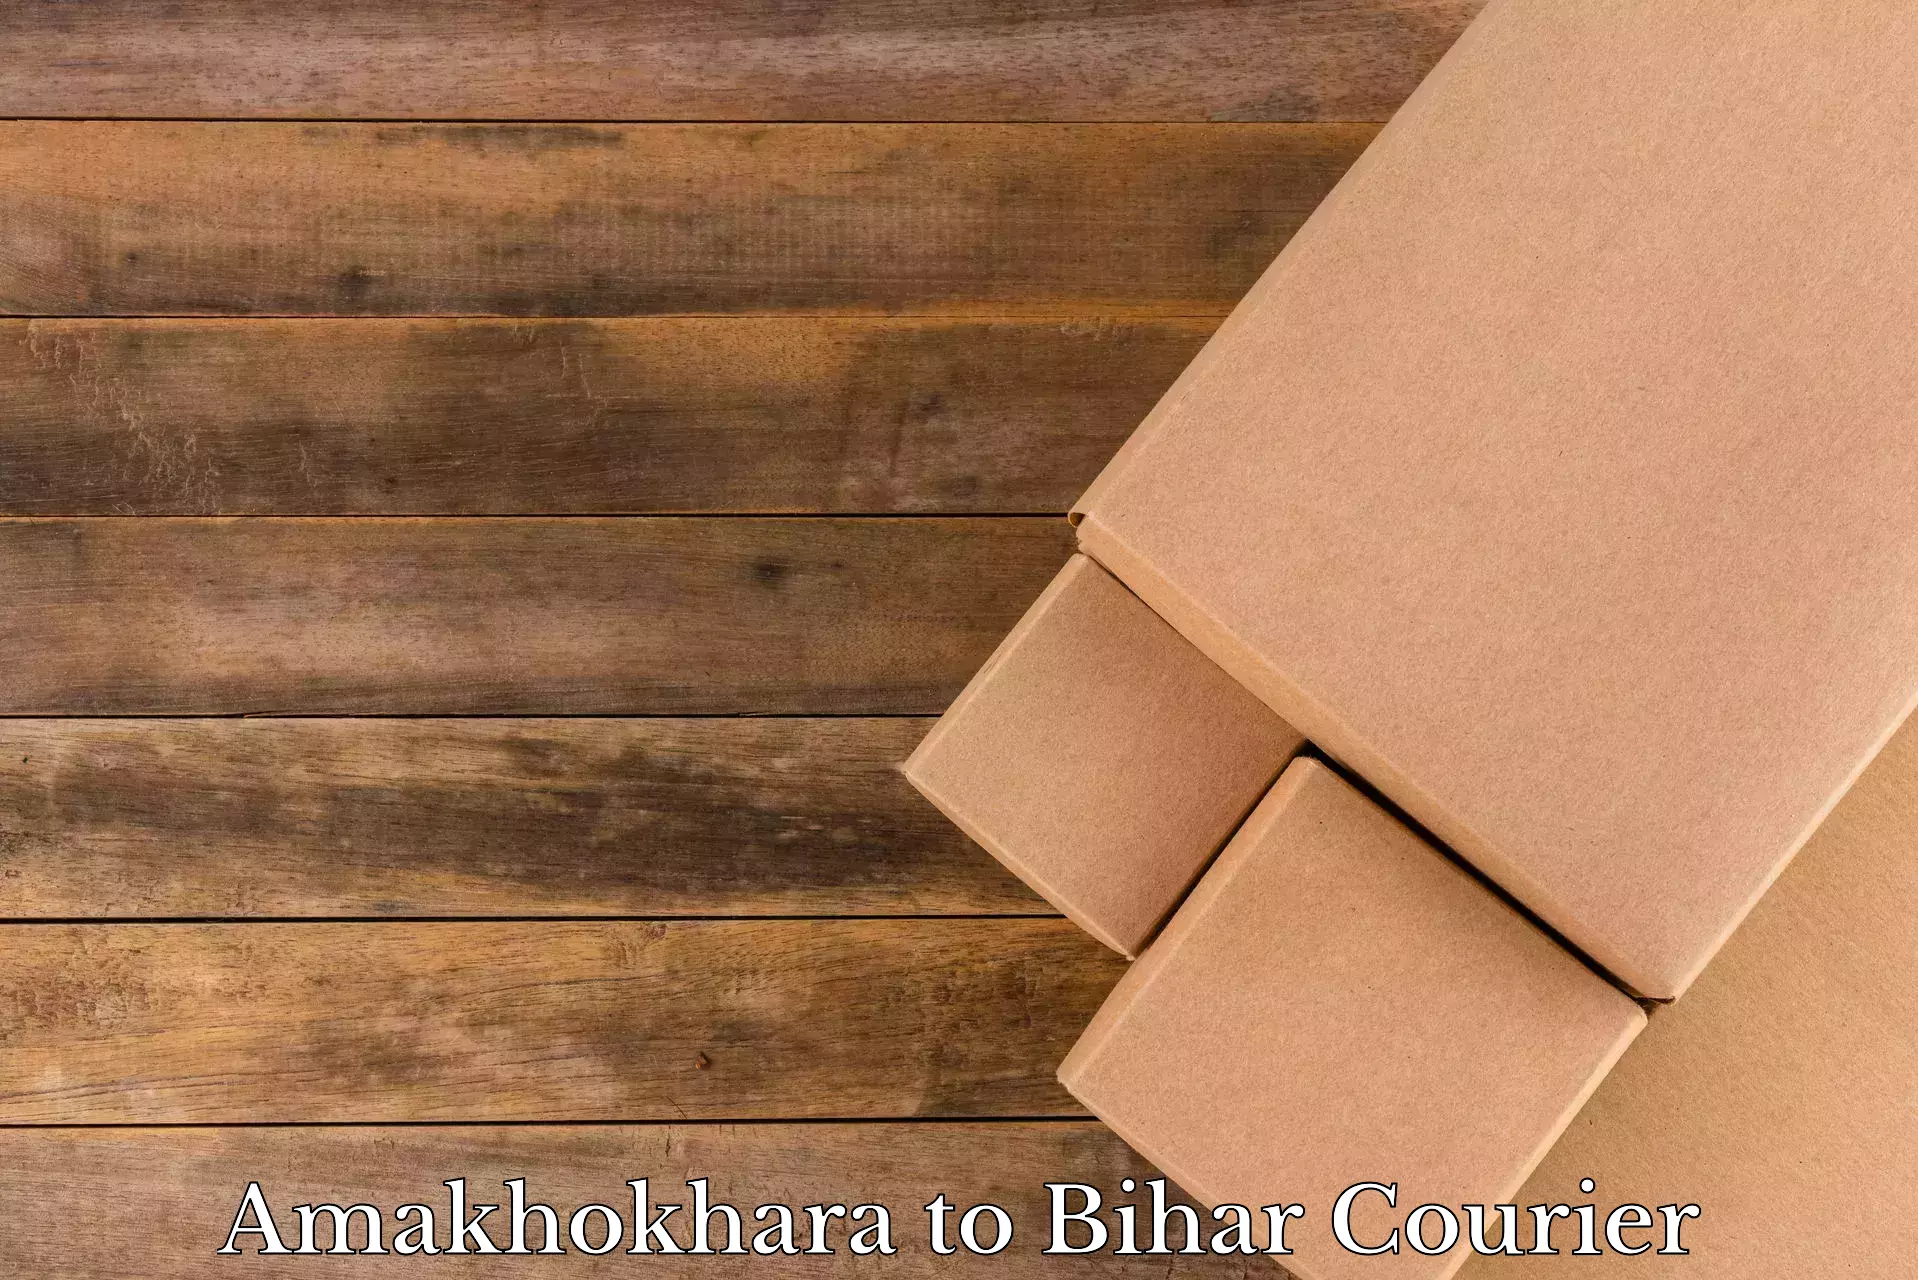 Professional relocation services in Amakhokhara to Marhowrah